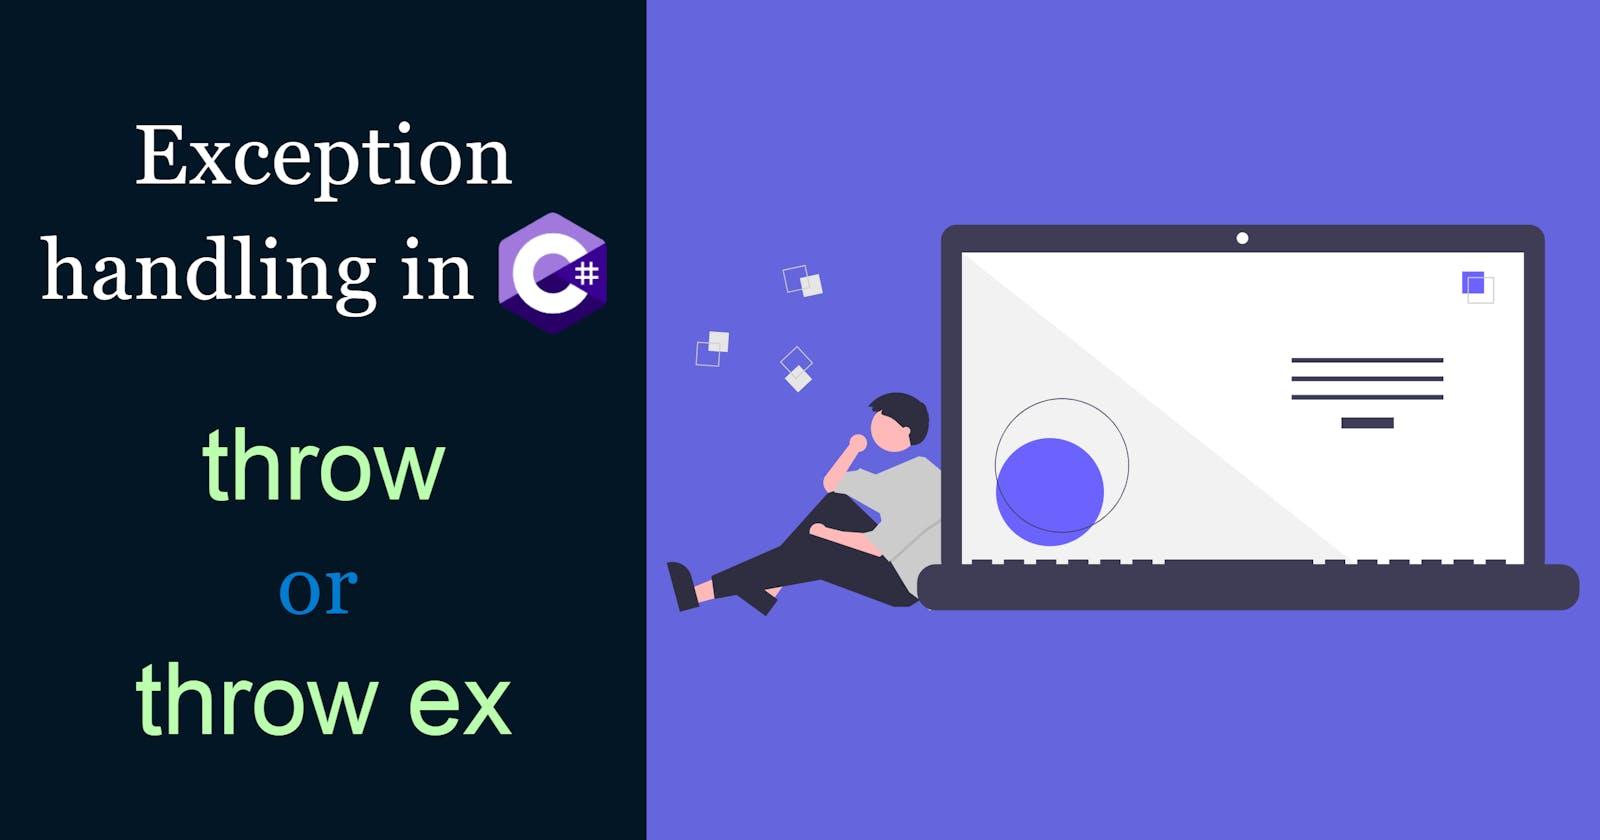 Exception handling in C# - throw or throw ex